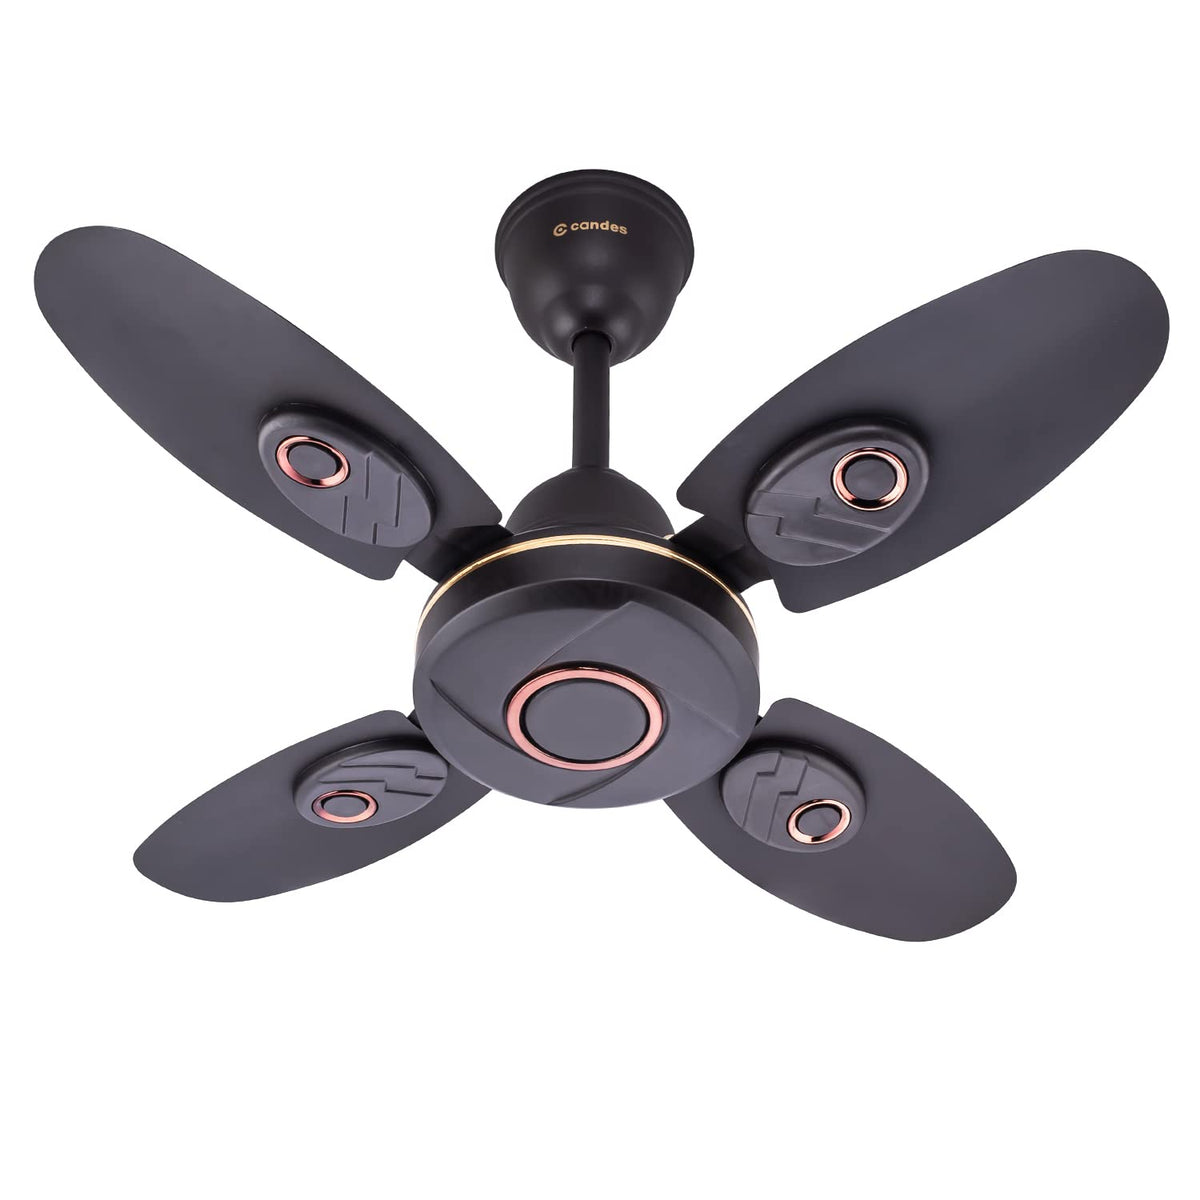 Candes Nexo 600mm Decorative Ceiling Fans for Home | 4 Blade Energy Saving High Speed | 2 Years Warranty, Pack of 1 (Coffee Brown)